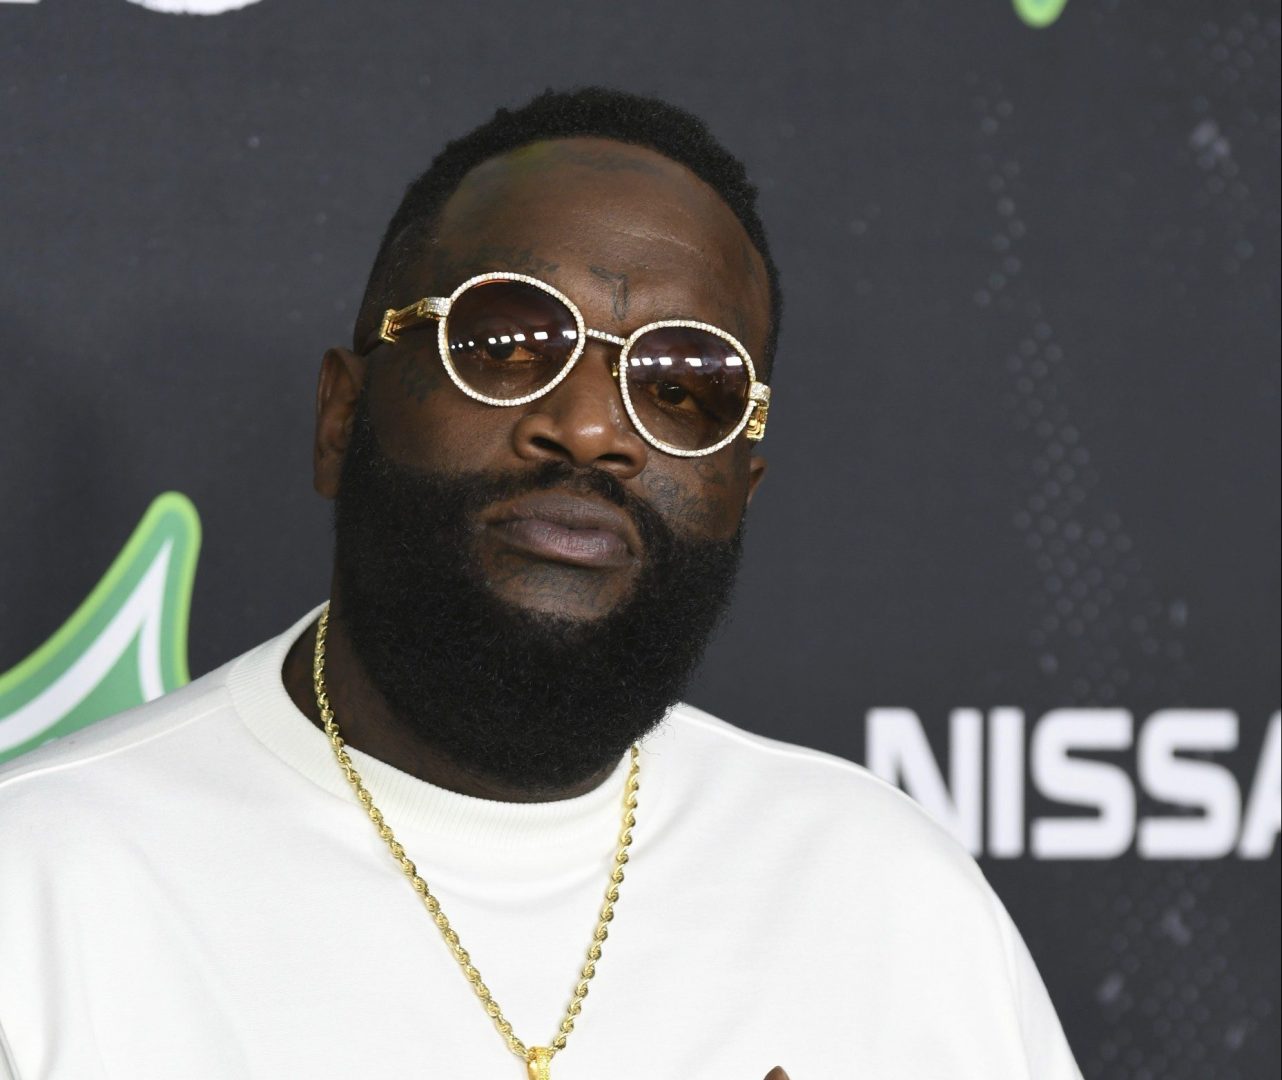 Rick Ross challenging 50 Cent by filming his own TV show